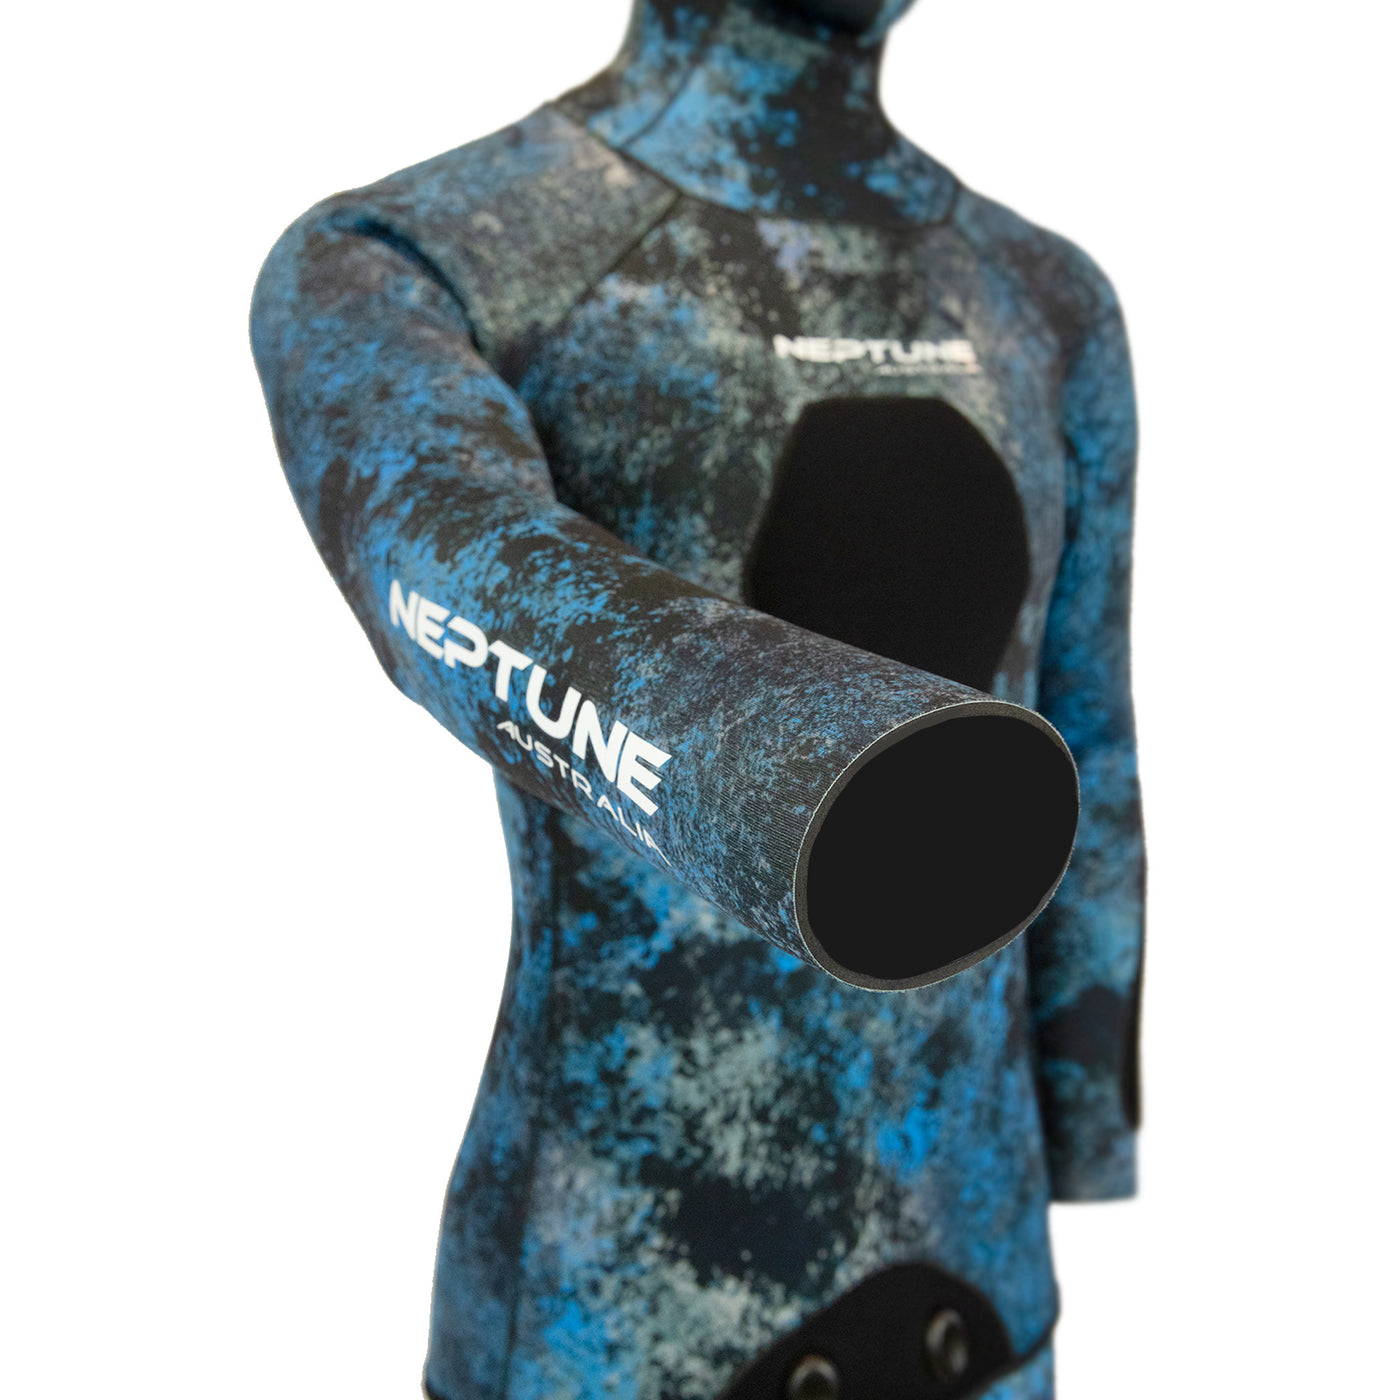 Female Open Cell Wetsuit